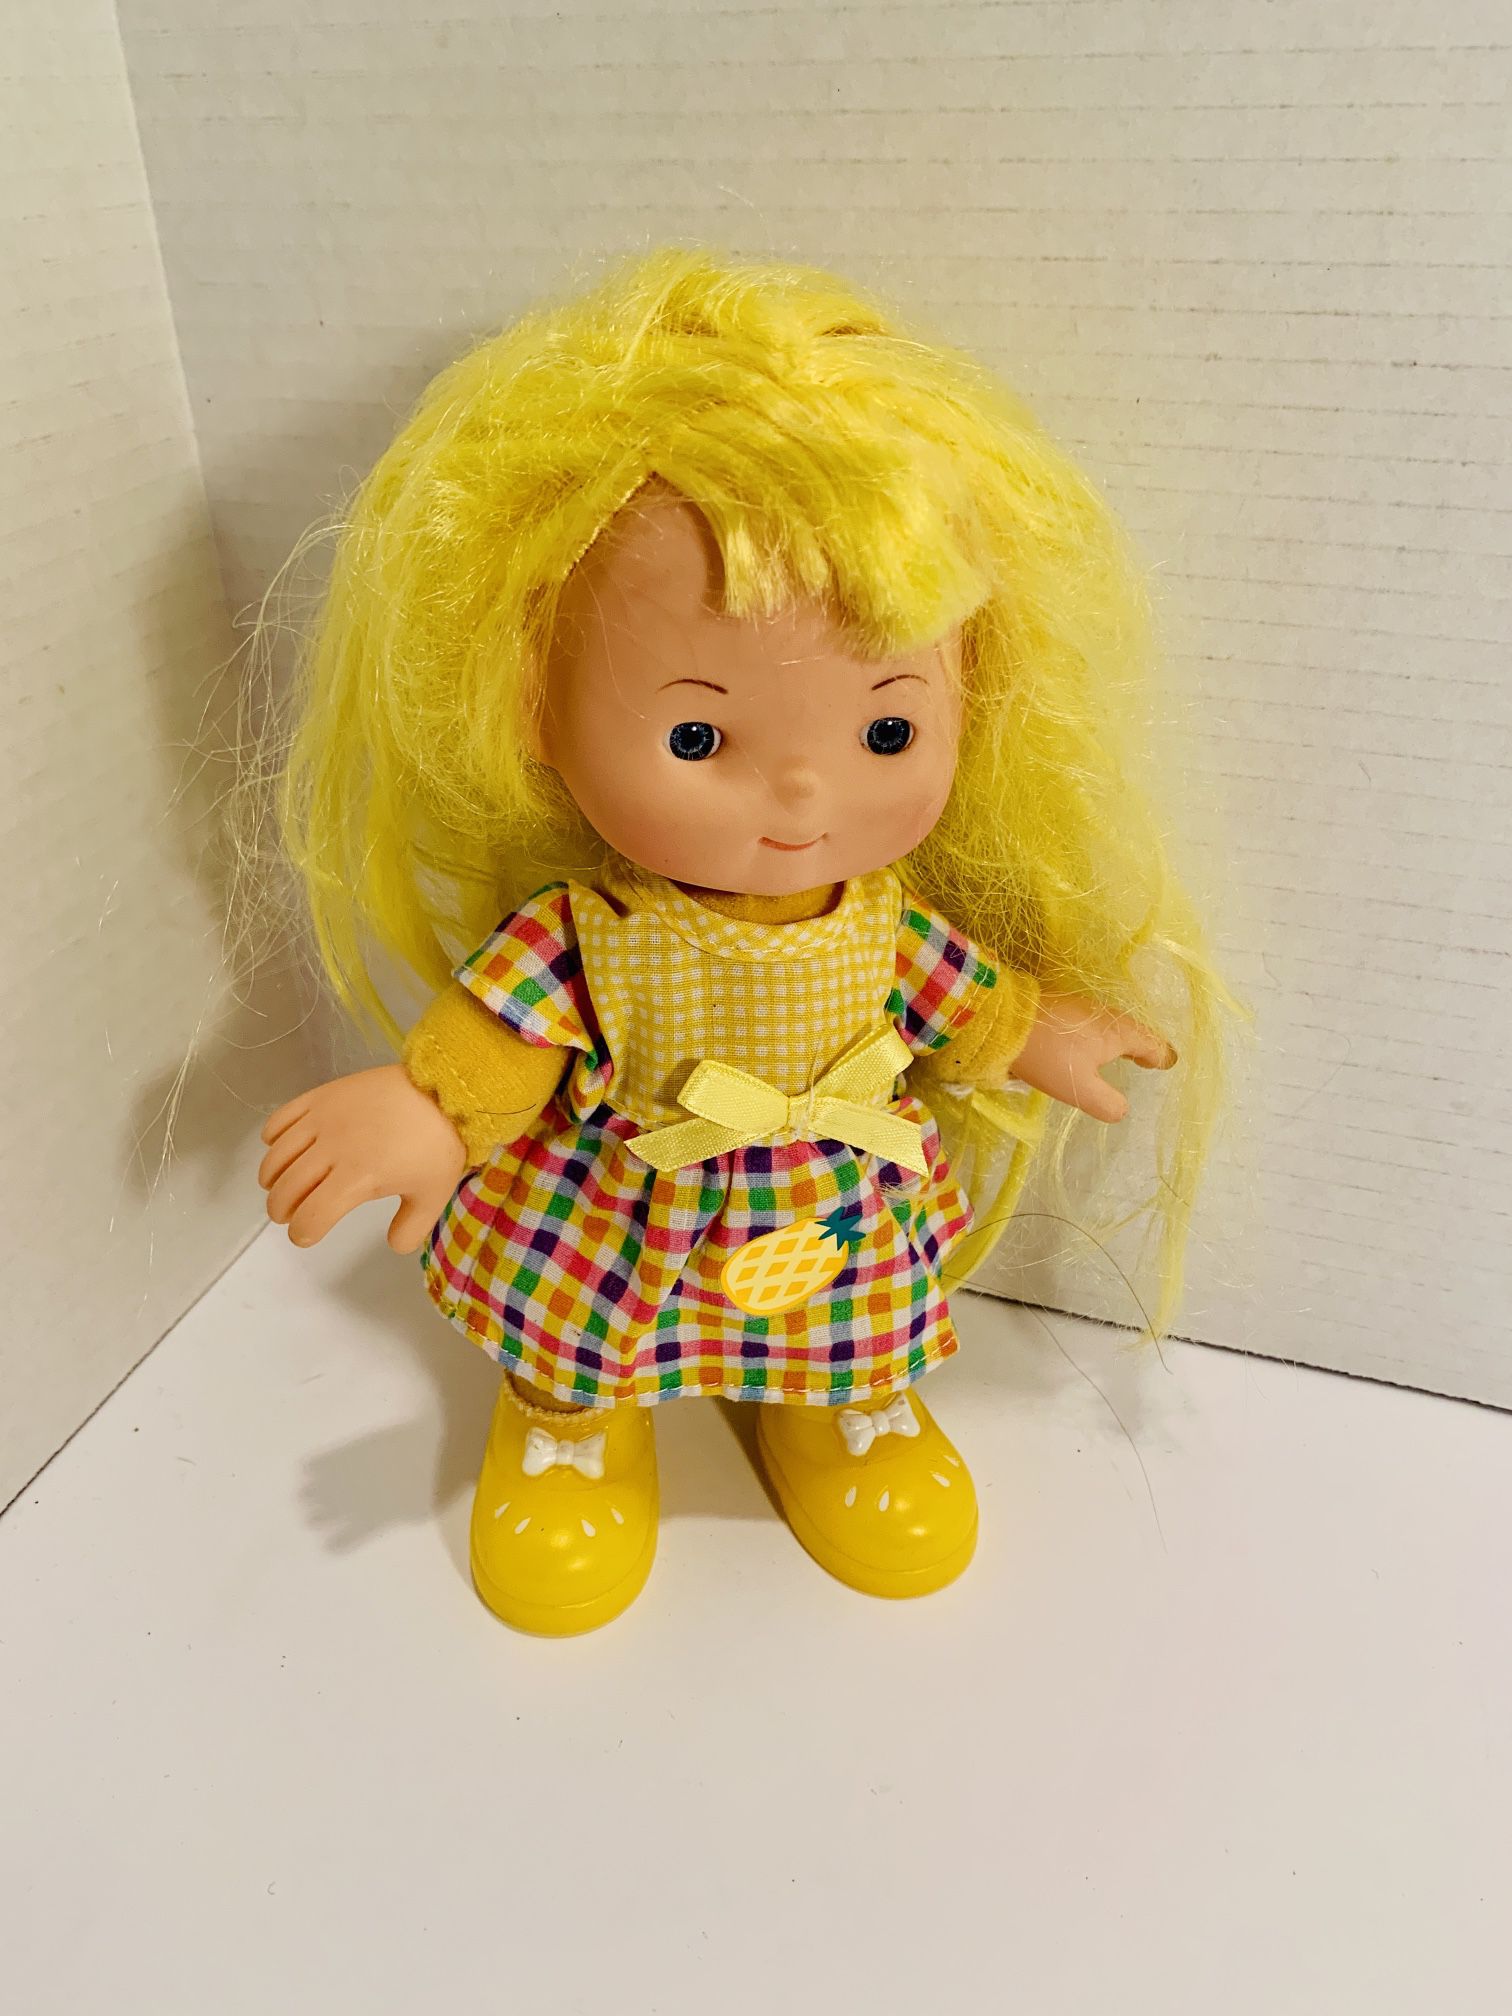 Vintage GI-GO TOYS Cloth/Plastic Expressions DOLL Yellow Hair Pineapple Girl